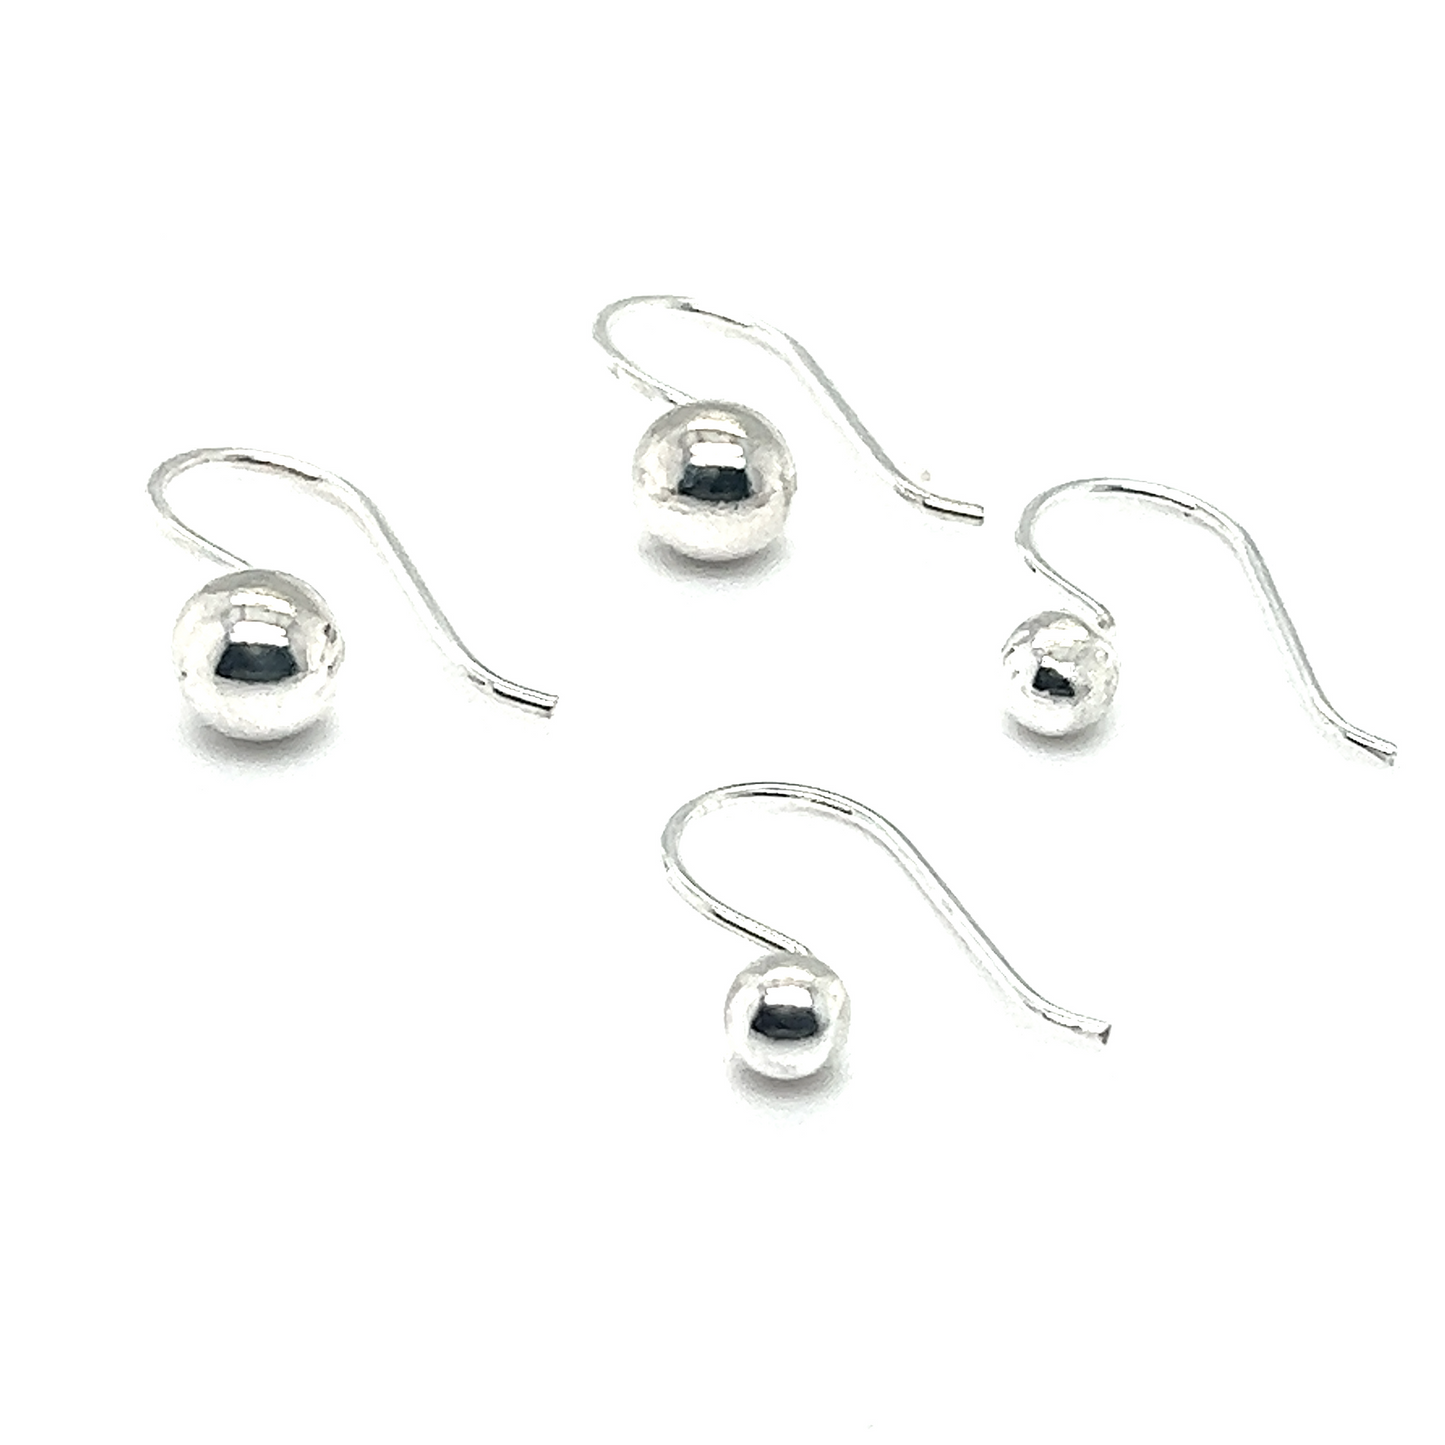 Add a touch of timeless minimalism to your look with these Super Silver Dainty Fixed Ball Earrings. Perfect for everyday sophistication.